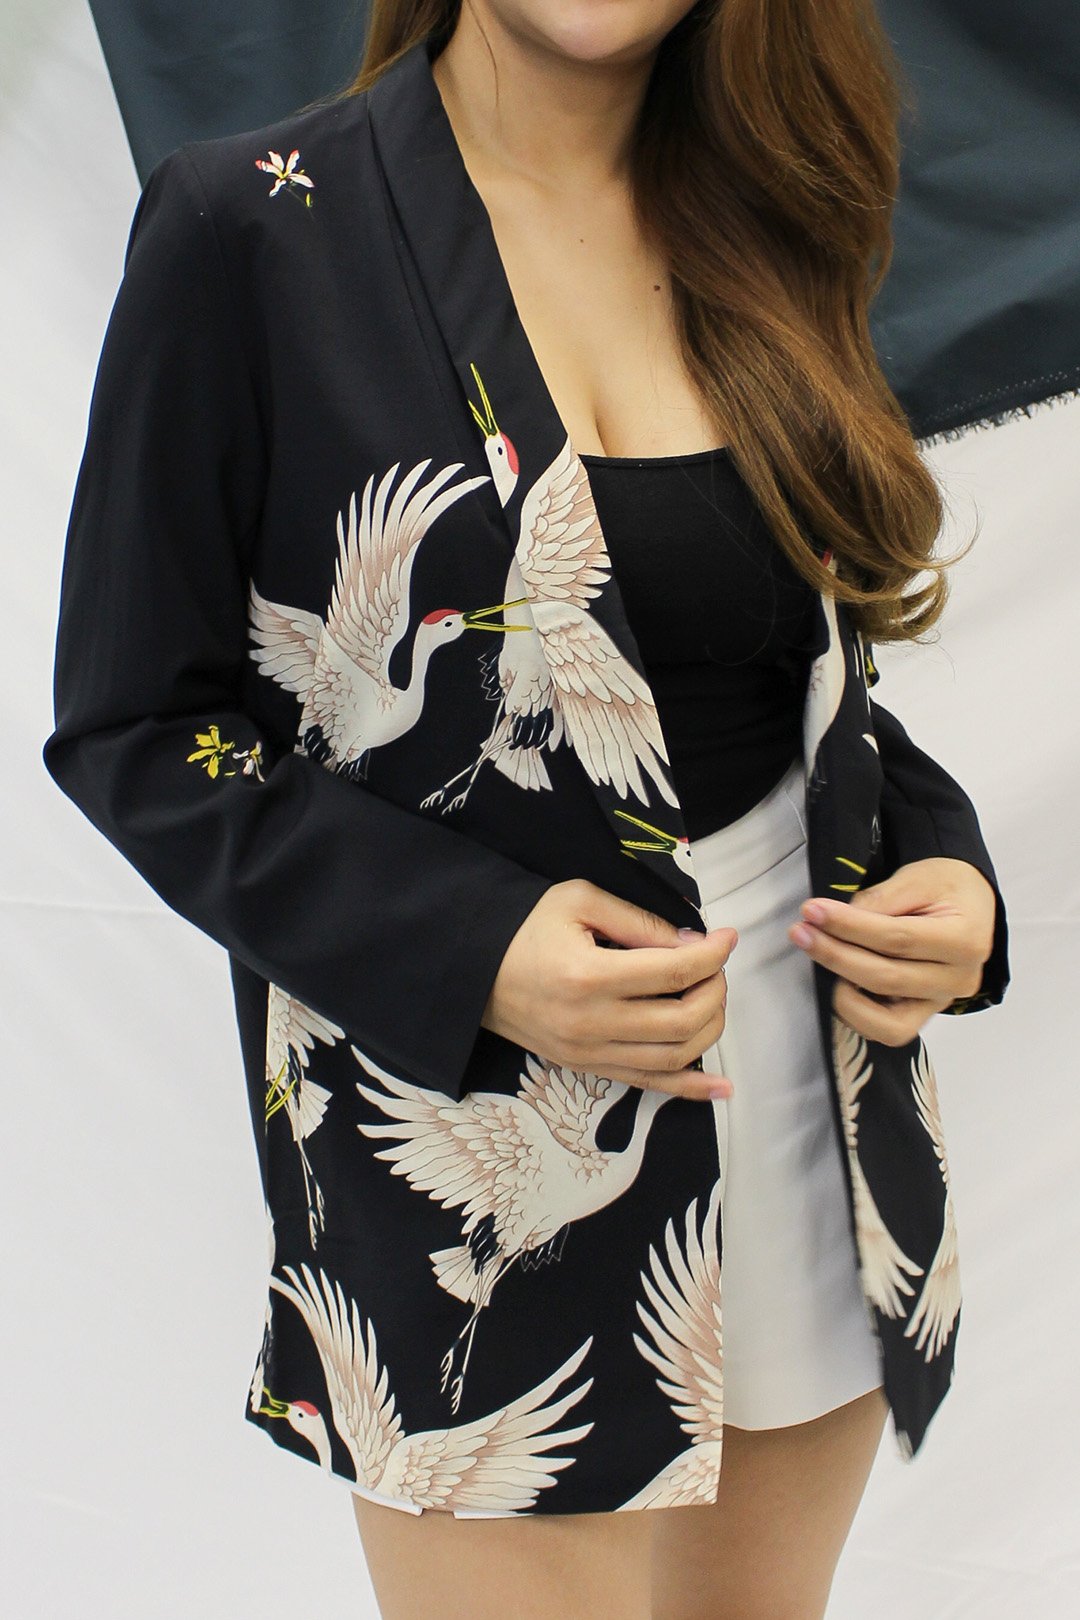 A Zara inspired crane printed blazer, suitable for oversized fit. It comes with a waist belt as well.